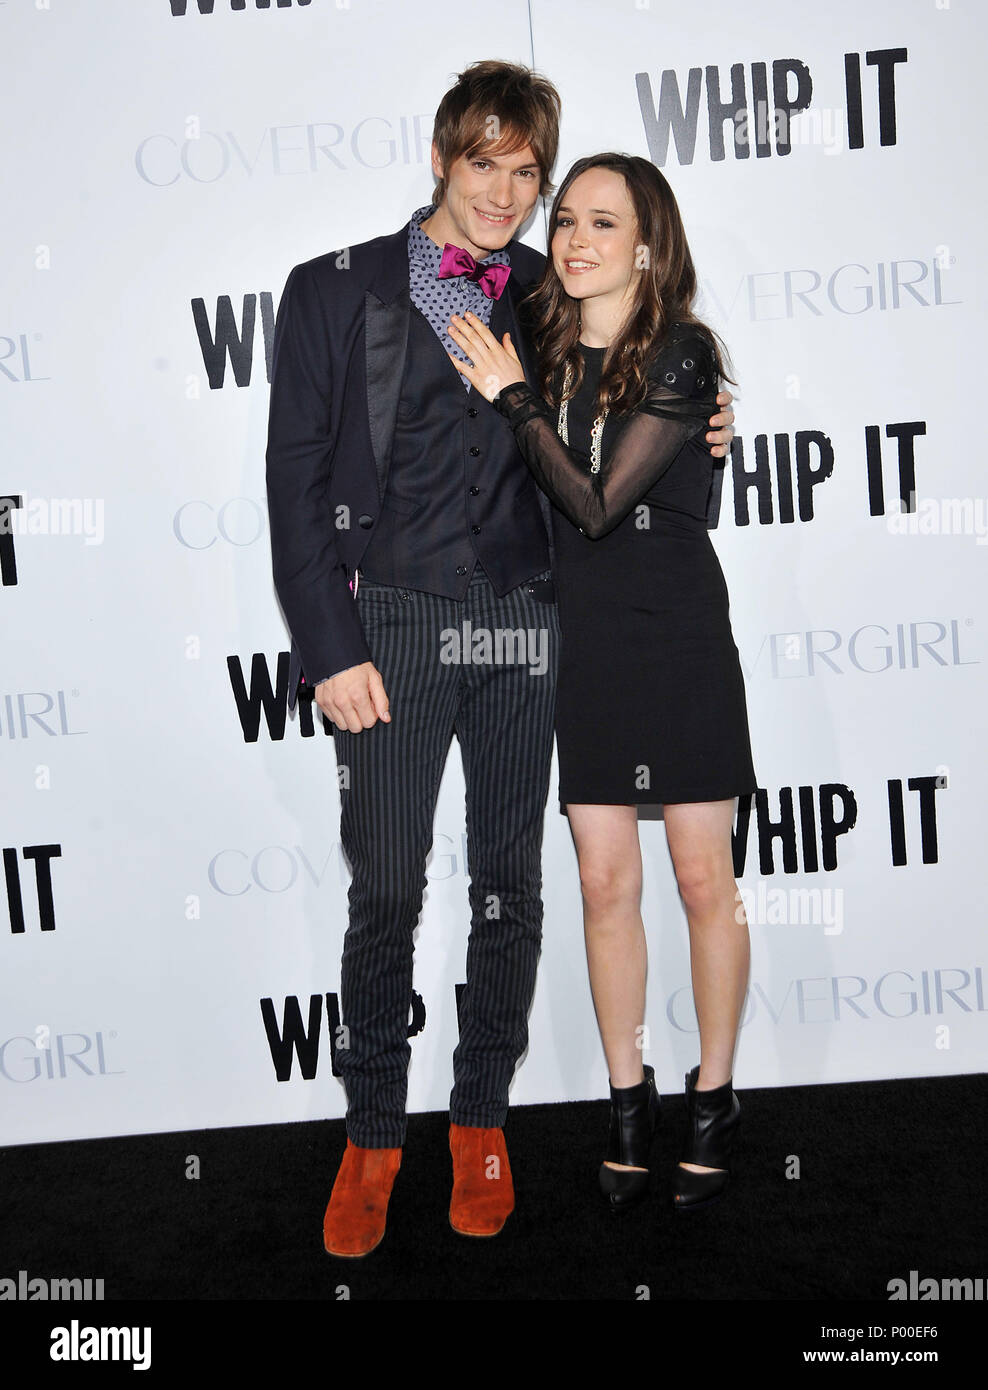 Landon Pigg and  Ellen Page  - Whip It Premiere at the Chinese Theatre In Los Angeles.PageEllen PiggLandon 072  Event in Hollywood Life - California, Red Carpet Event, USA, Film Industry, Celebrities, Photography, Bestof, Arts Culture and Entertainment, Celebrities fashion, Best of, Hollywood Life, Event in Hollywood Life - California, Red Carpet and backstage, Music celebrities, Topix, Couple, family ( husband and wife ) and kids- Children, brothers and sisters inquiry tsuni@Gamma-USA.com, Credit Tsuni / USA, 2006 to 2009 Stock Photo